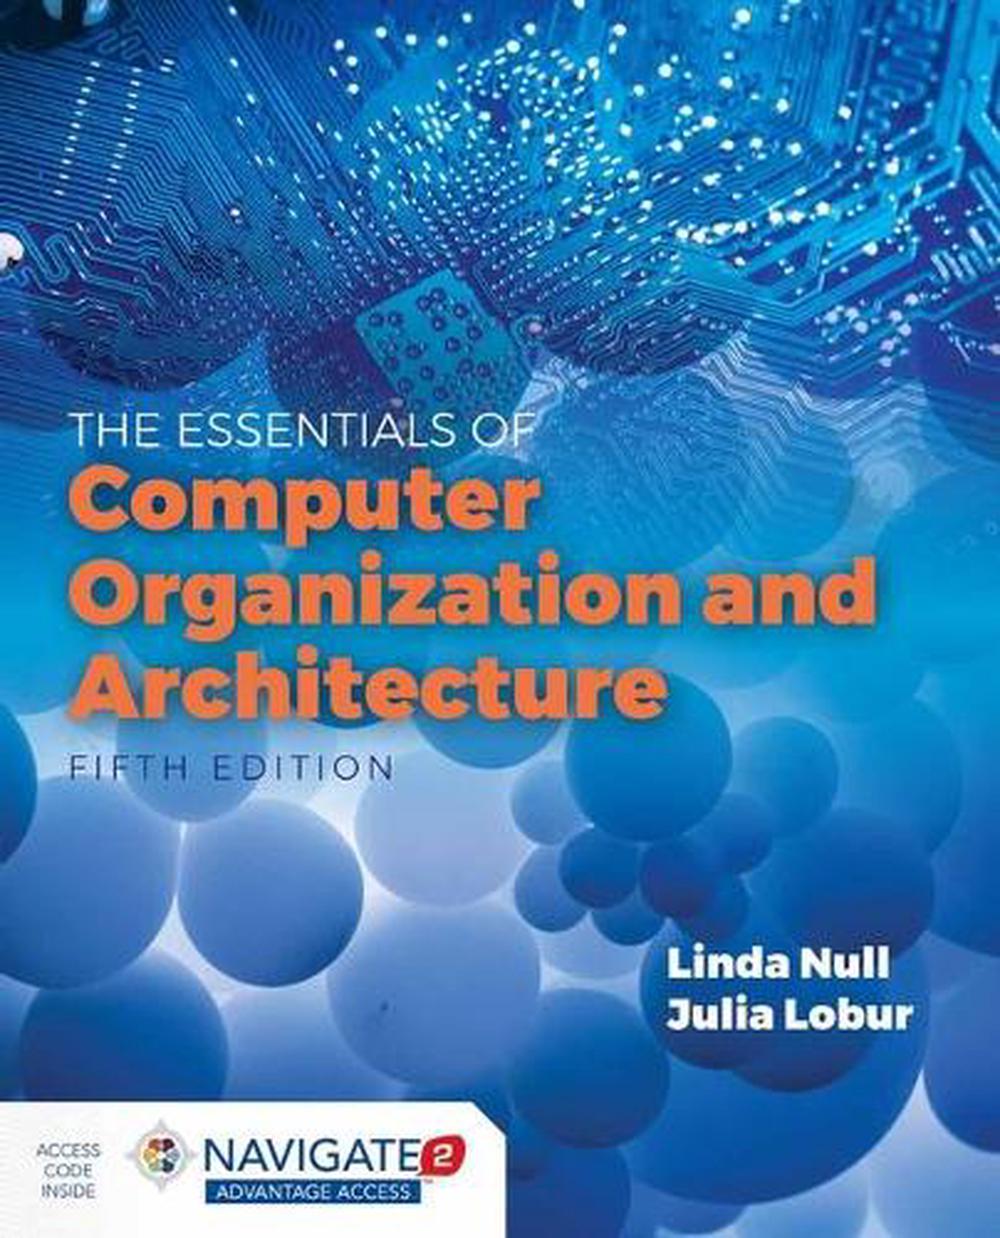 Essentials of Computer Organization and Architecture by Linda Null